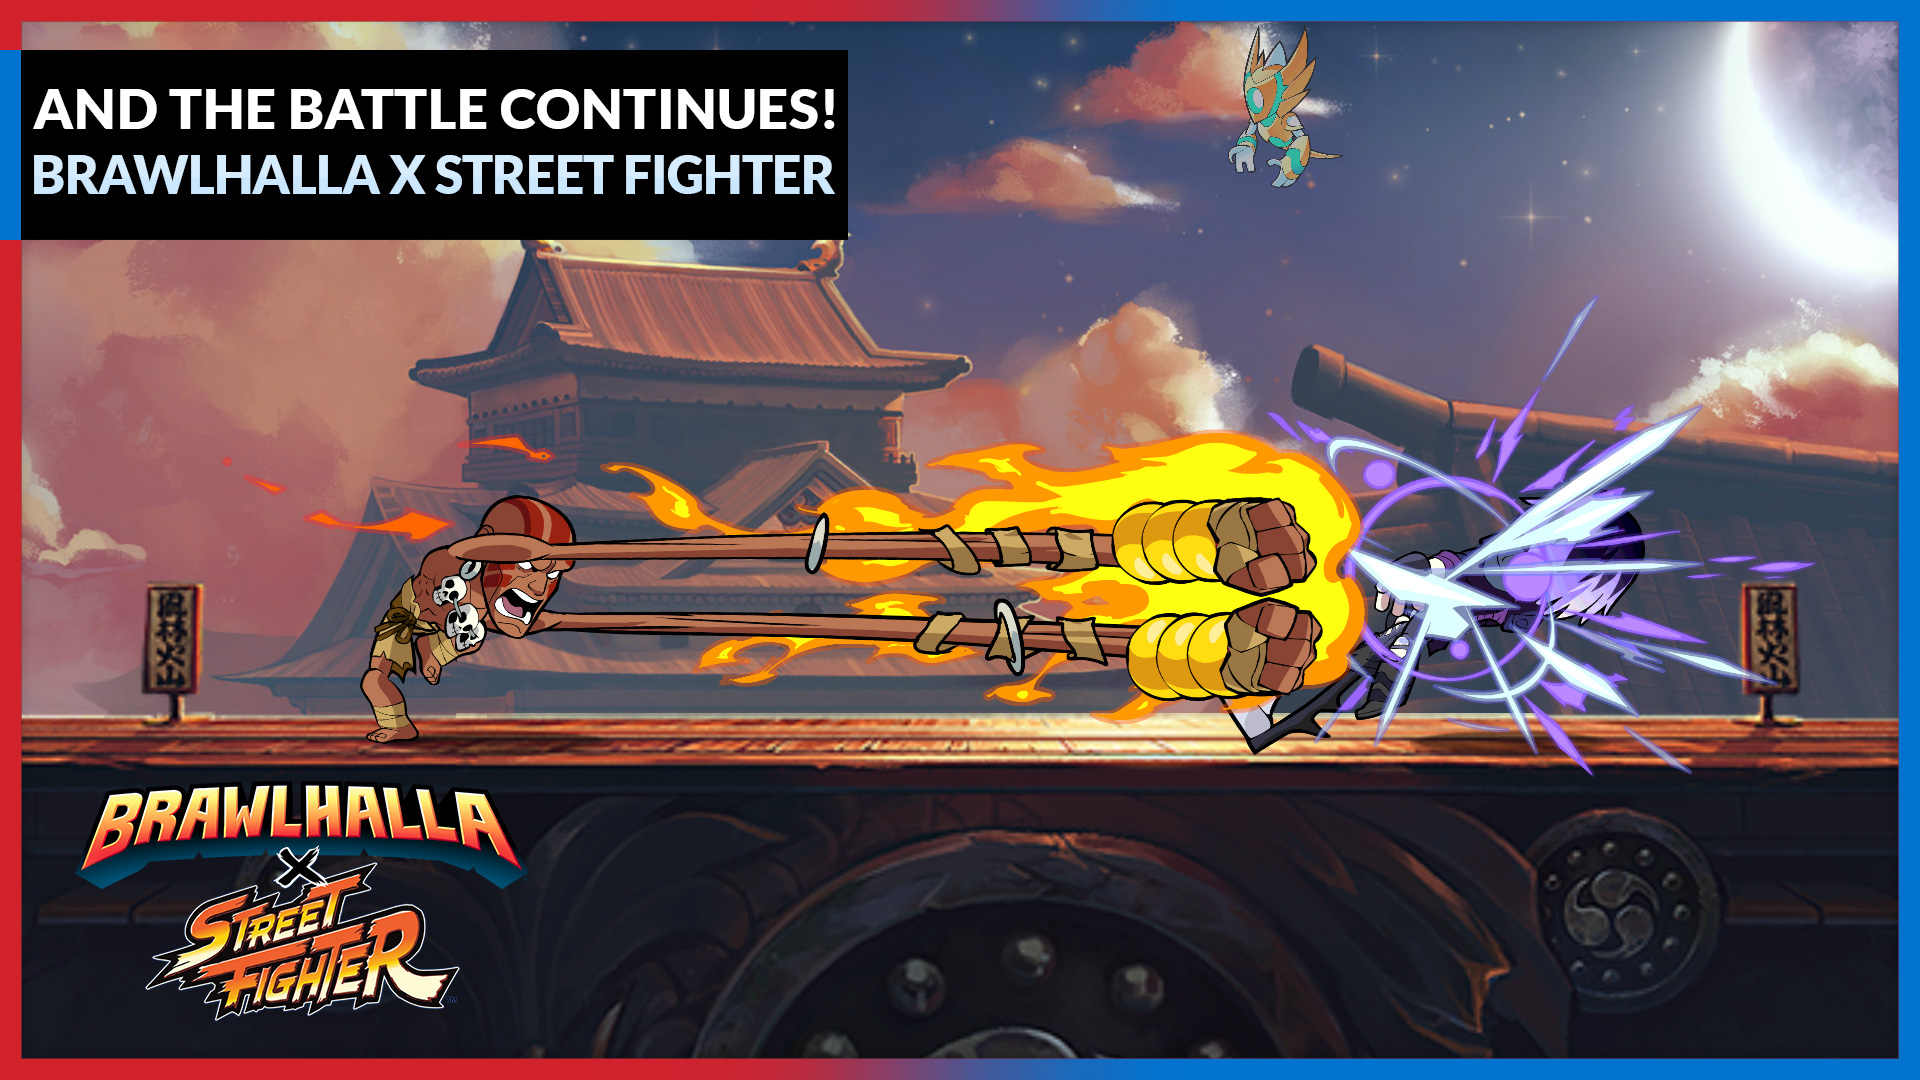 And the Battle Continues in Brawlhalla x Street Fighter!